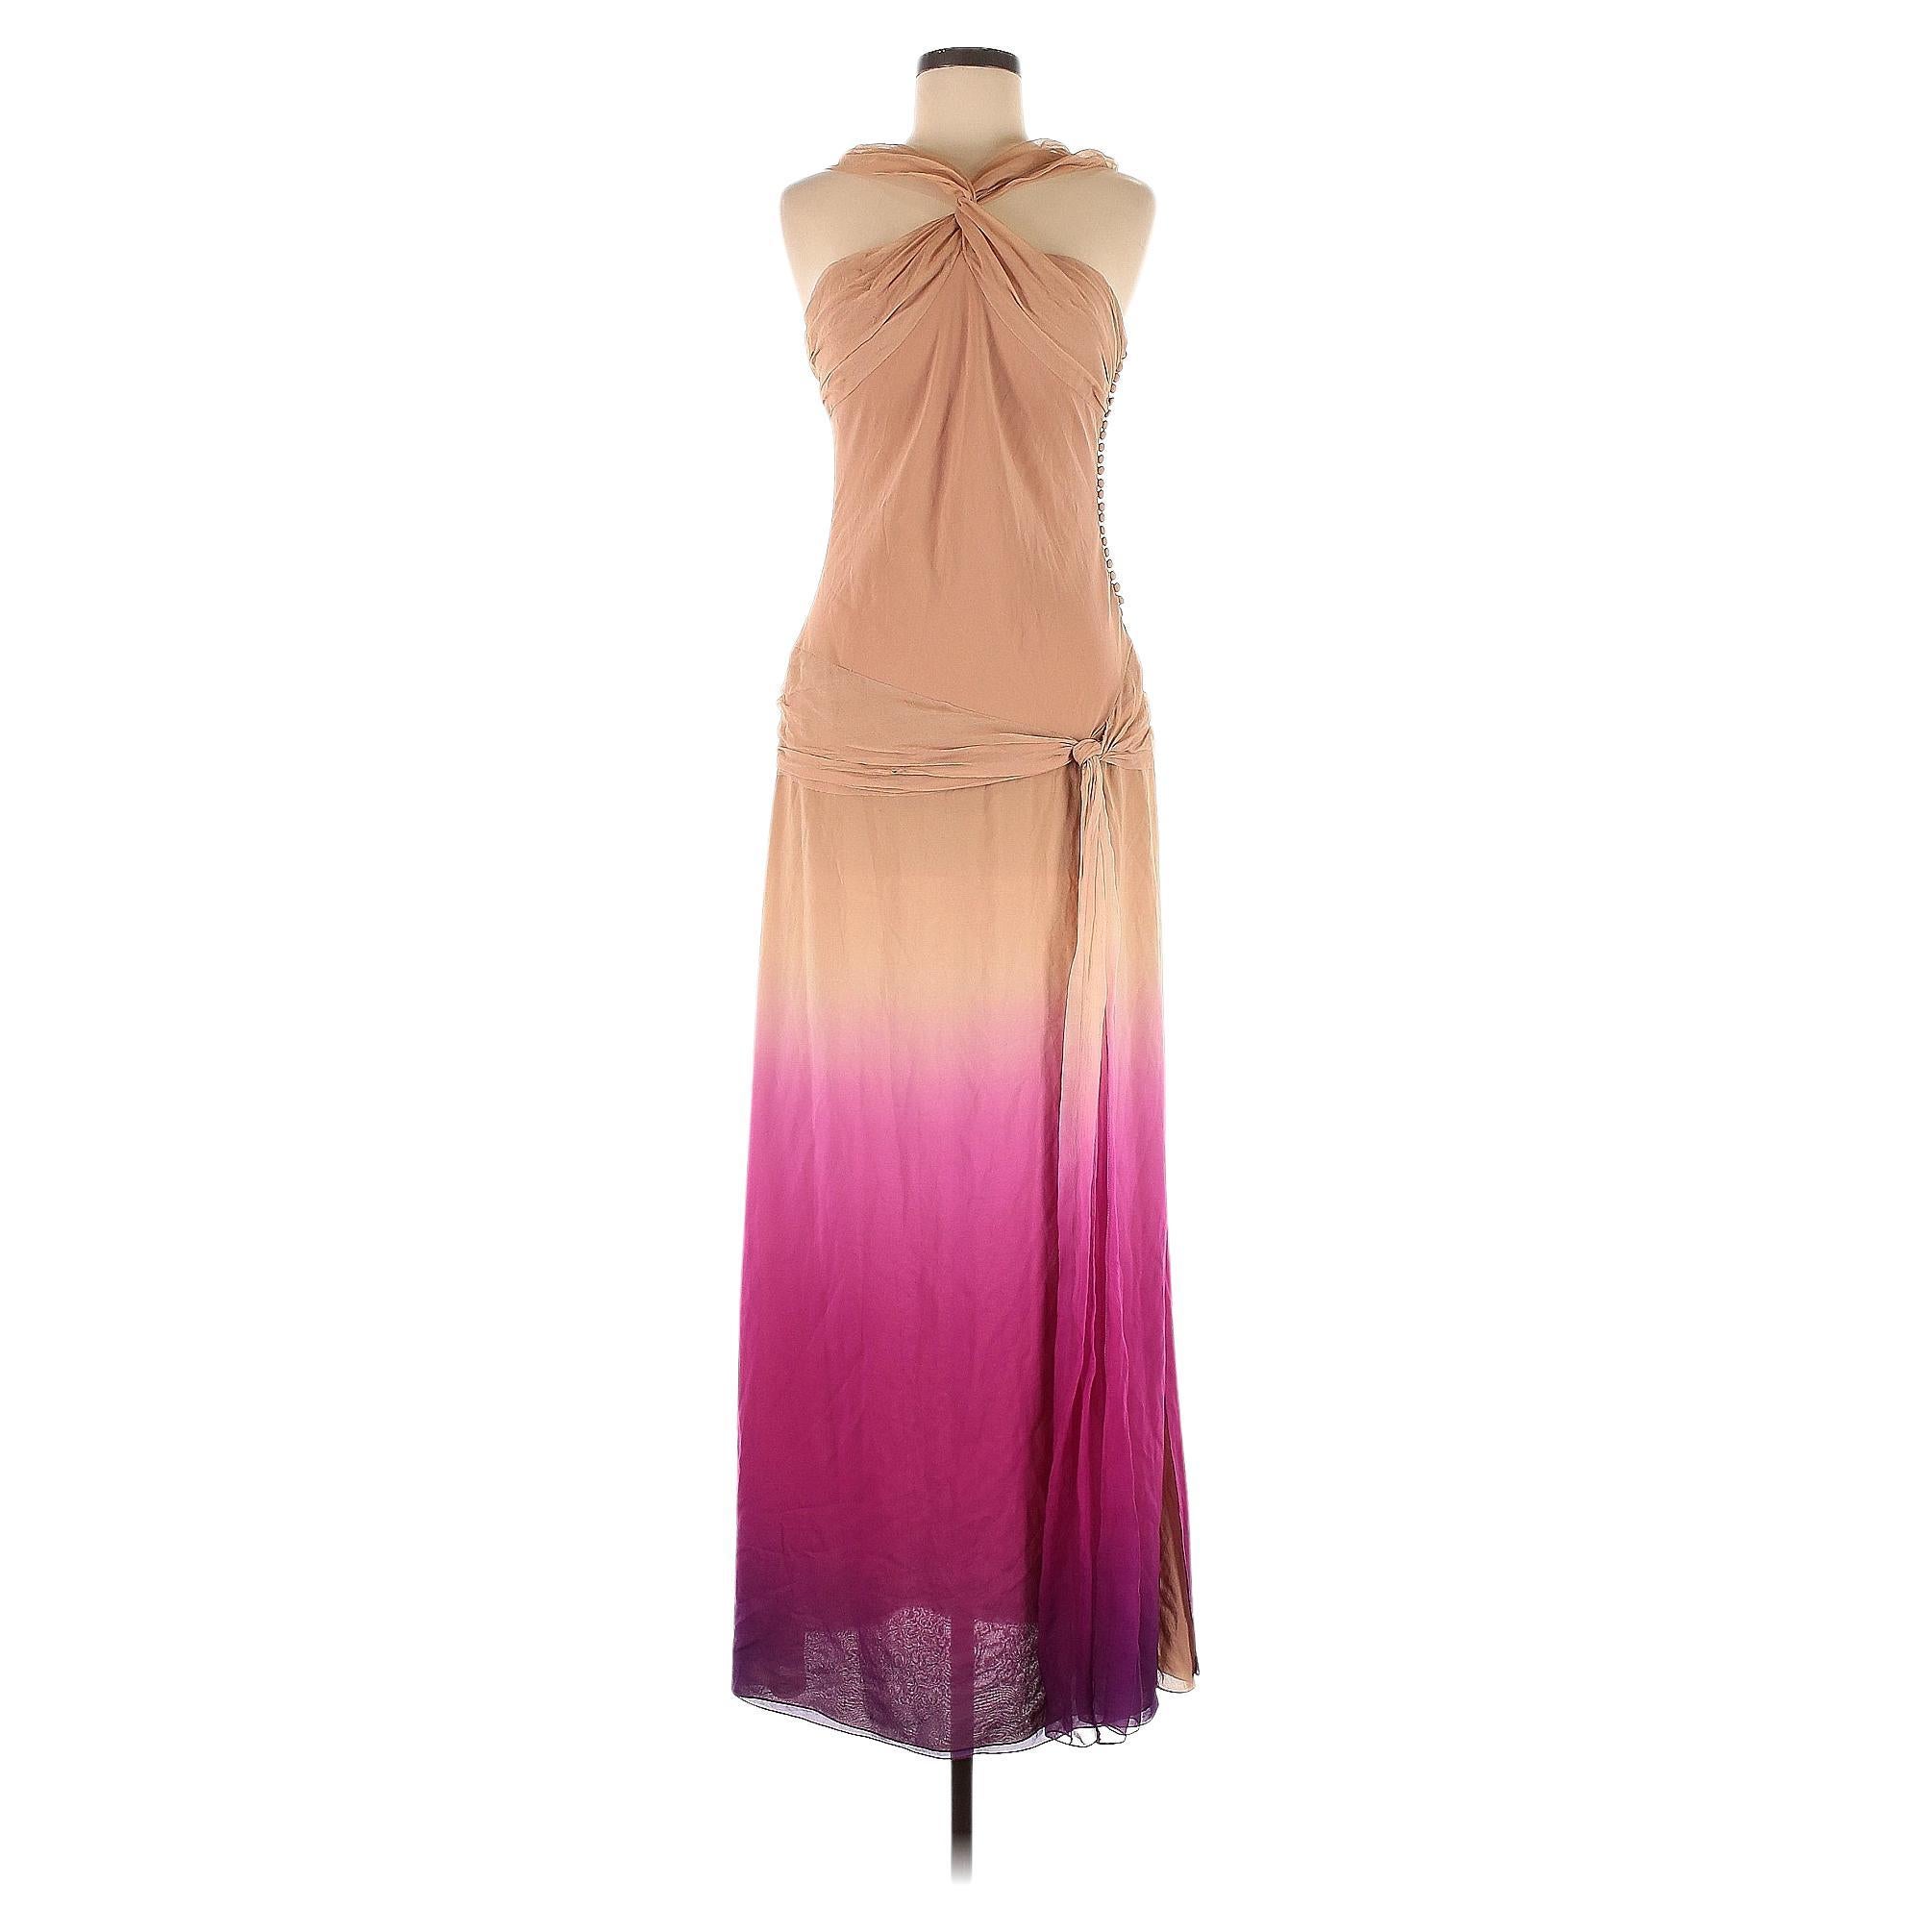 2006 Vintage John Galliano for Christian Dior Silk Gown